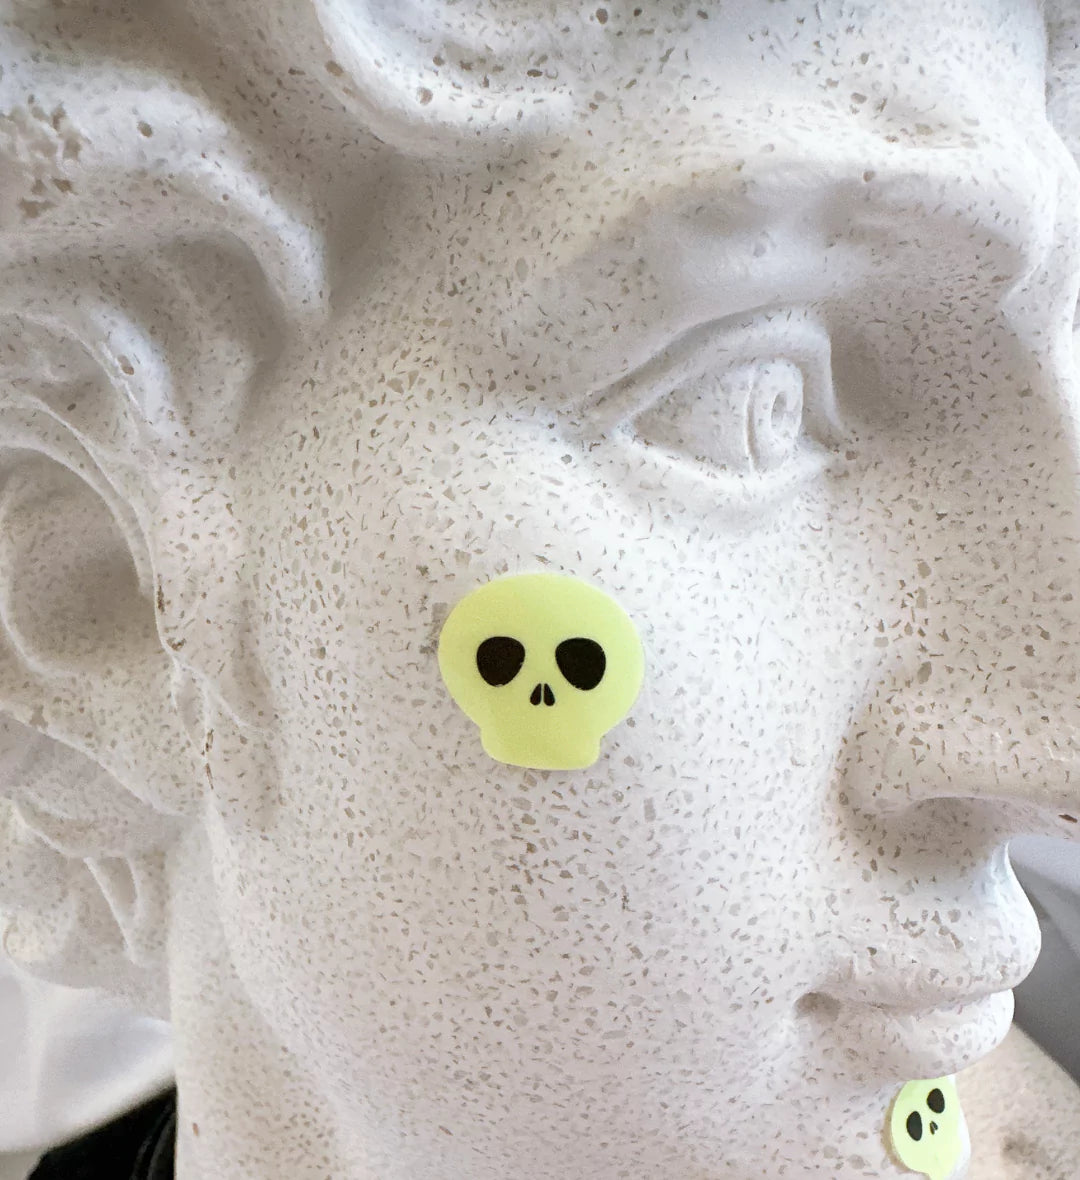 Glow-In-The-Dark Skull Acne Patches